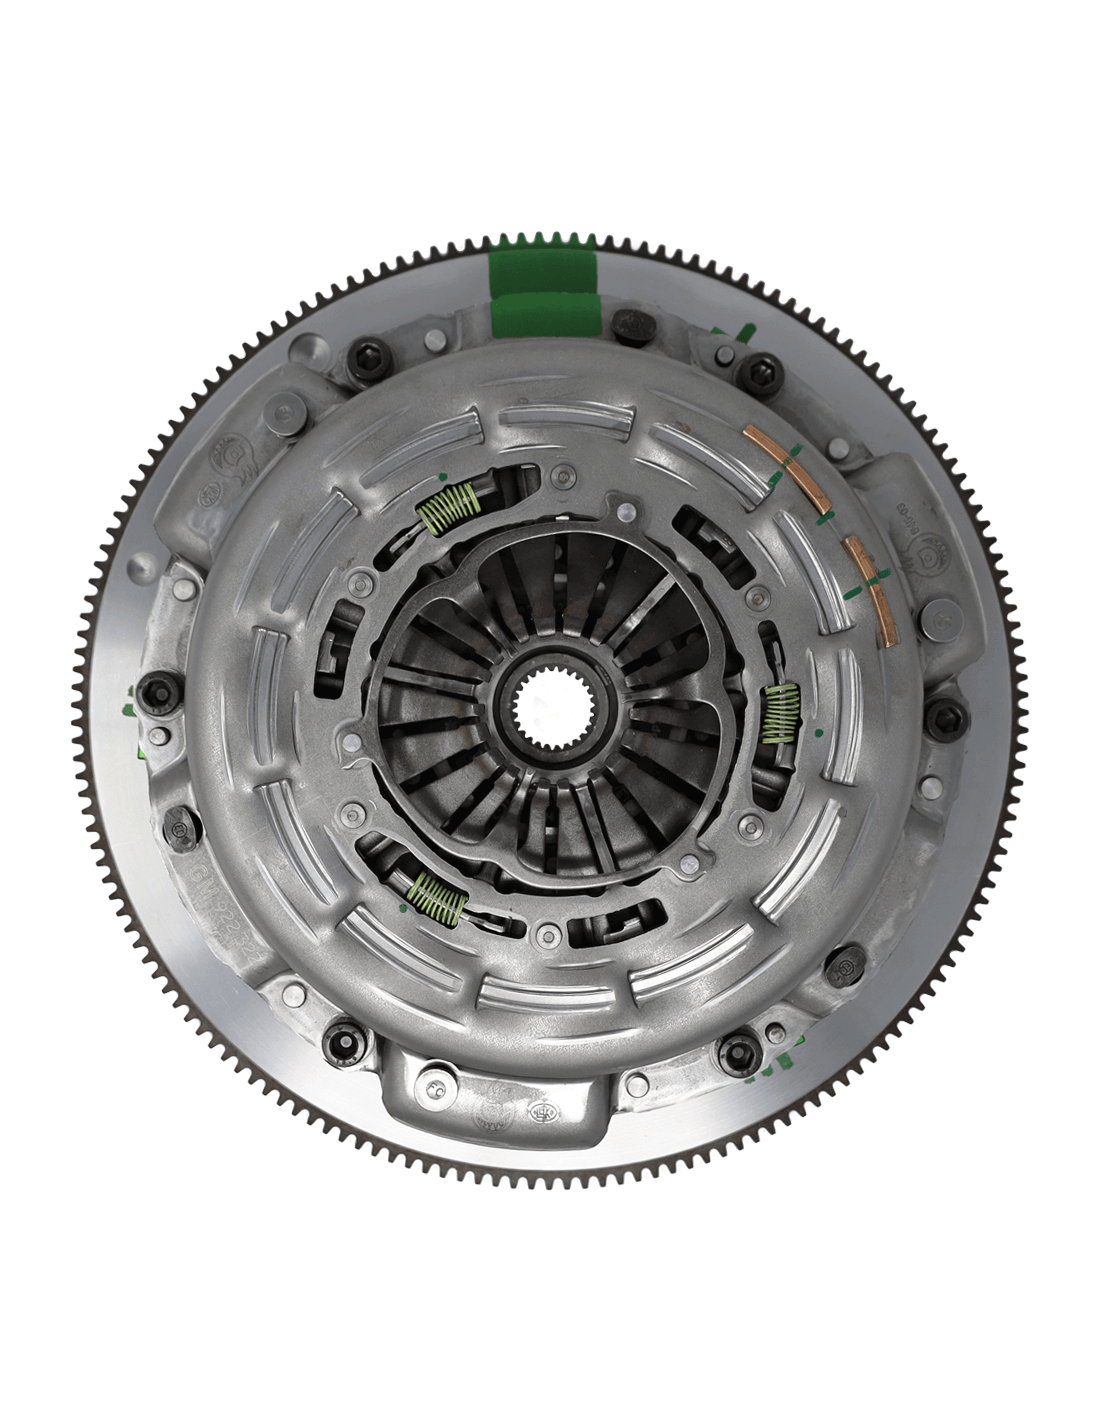 Monster Clutch Co. S Series Twin Disc Clutch (Stock-700RWHP) for Gen 5 (2010-2015) Chevrolet Camaro SS